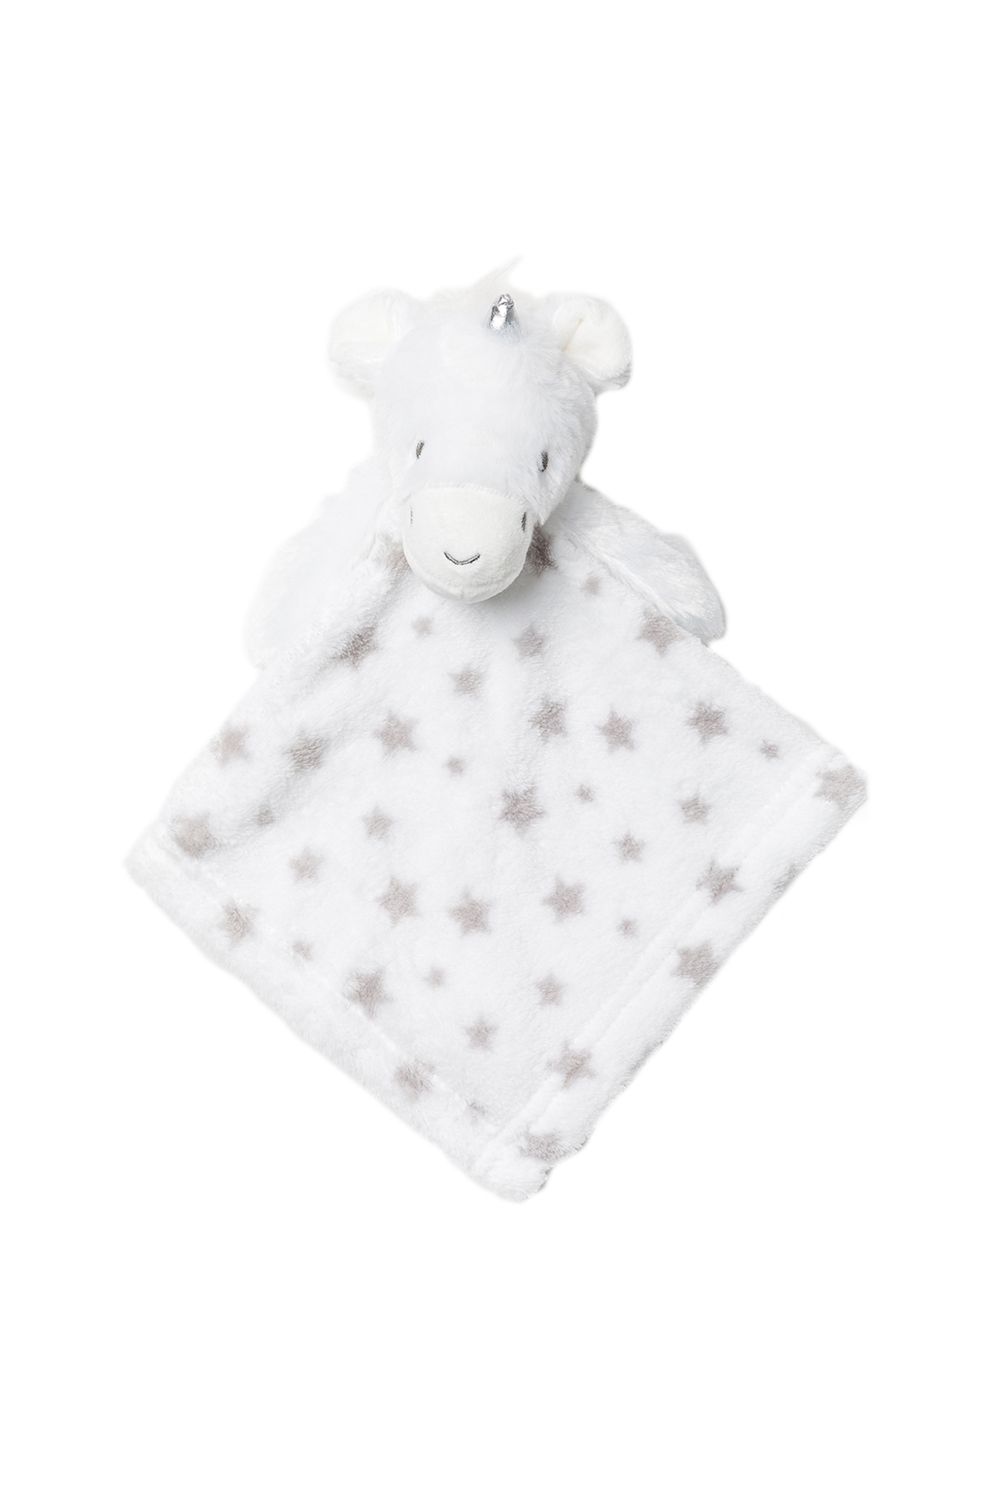 This adorable Snuggle Tots comforter and blanket set make the perfect gift for the little one in your life. The two-piece set features a beautiful, fluffy blanket with a grey star print all over, and a comforter with the same print with a cuddly unicorn toy attached. This set makes a lovely baby shower present.